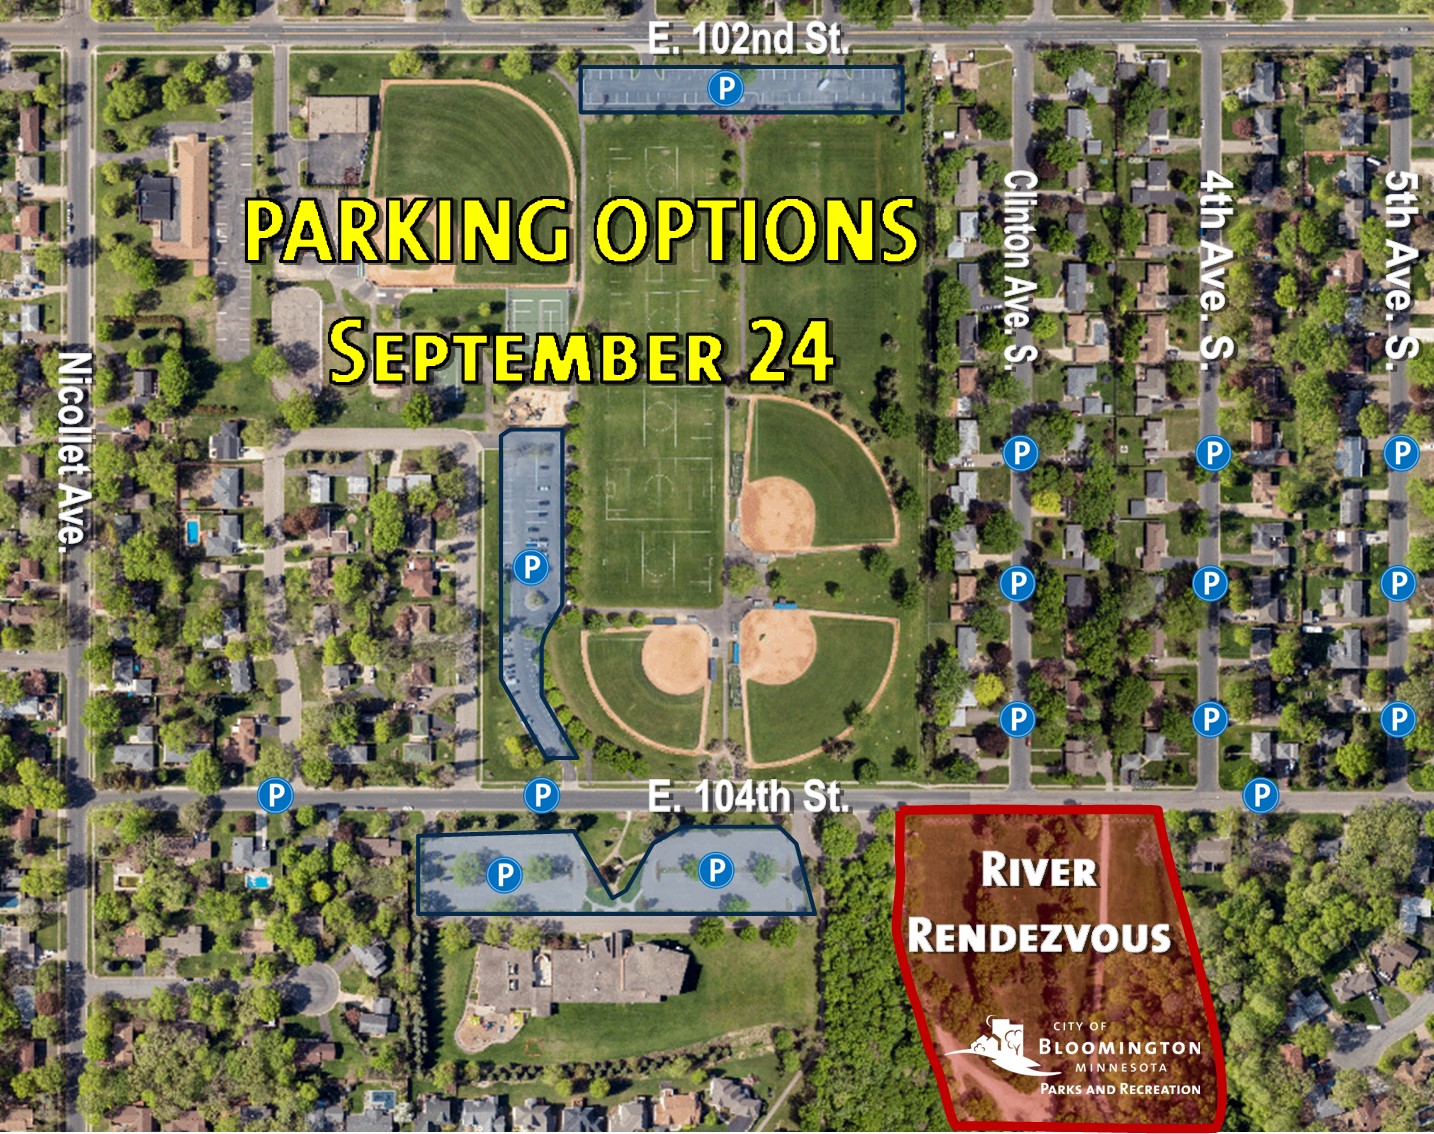 River Rendezvous Parking Map September 2022 With Church & 104th Street